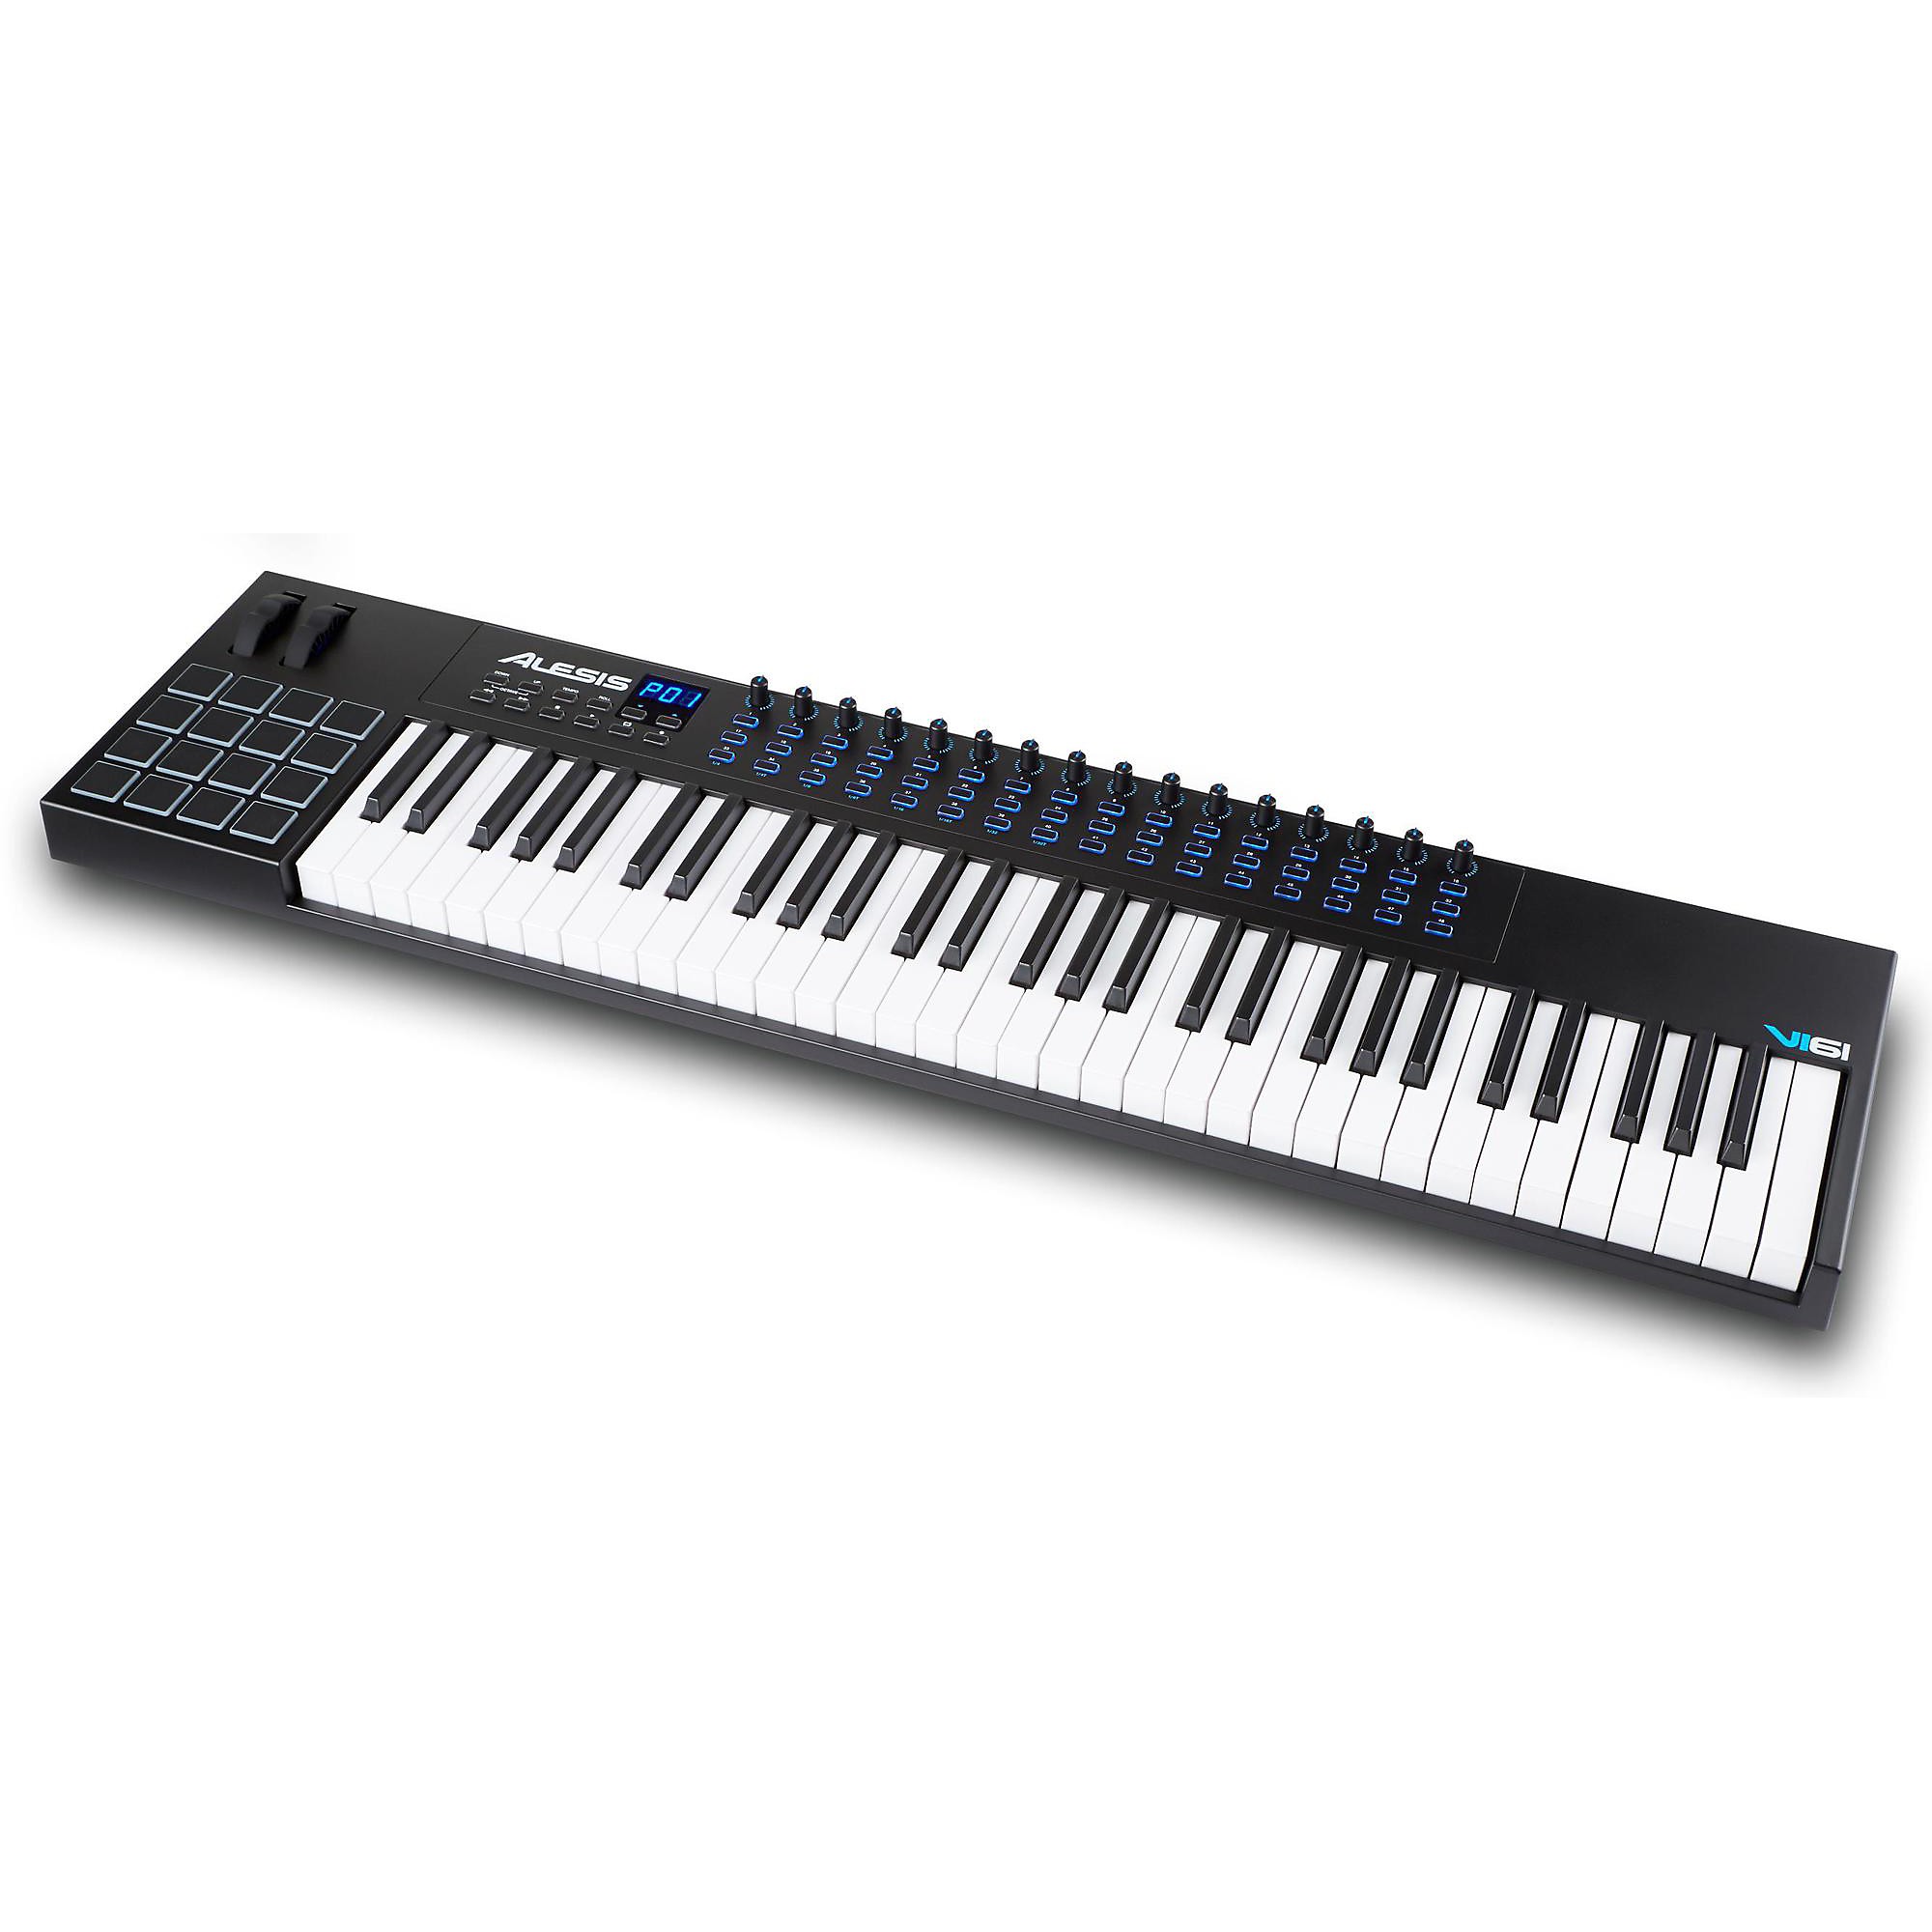 Alesis VI61 - 61 Key USB MIDI Keyboard Controller with 16 Pads, 16  Assignable Knobs, 48 Buttons and 5-Pin MIDI Out Plus Production Software